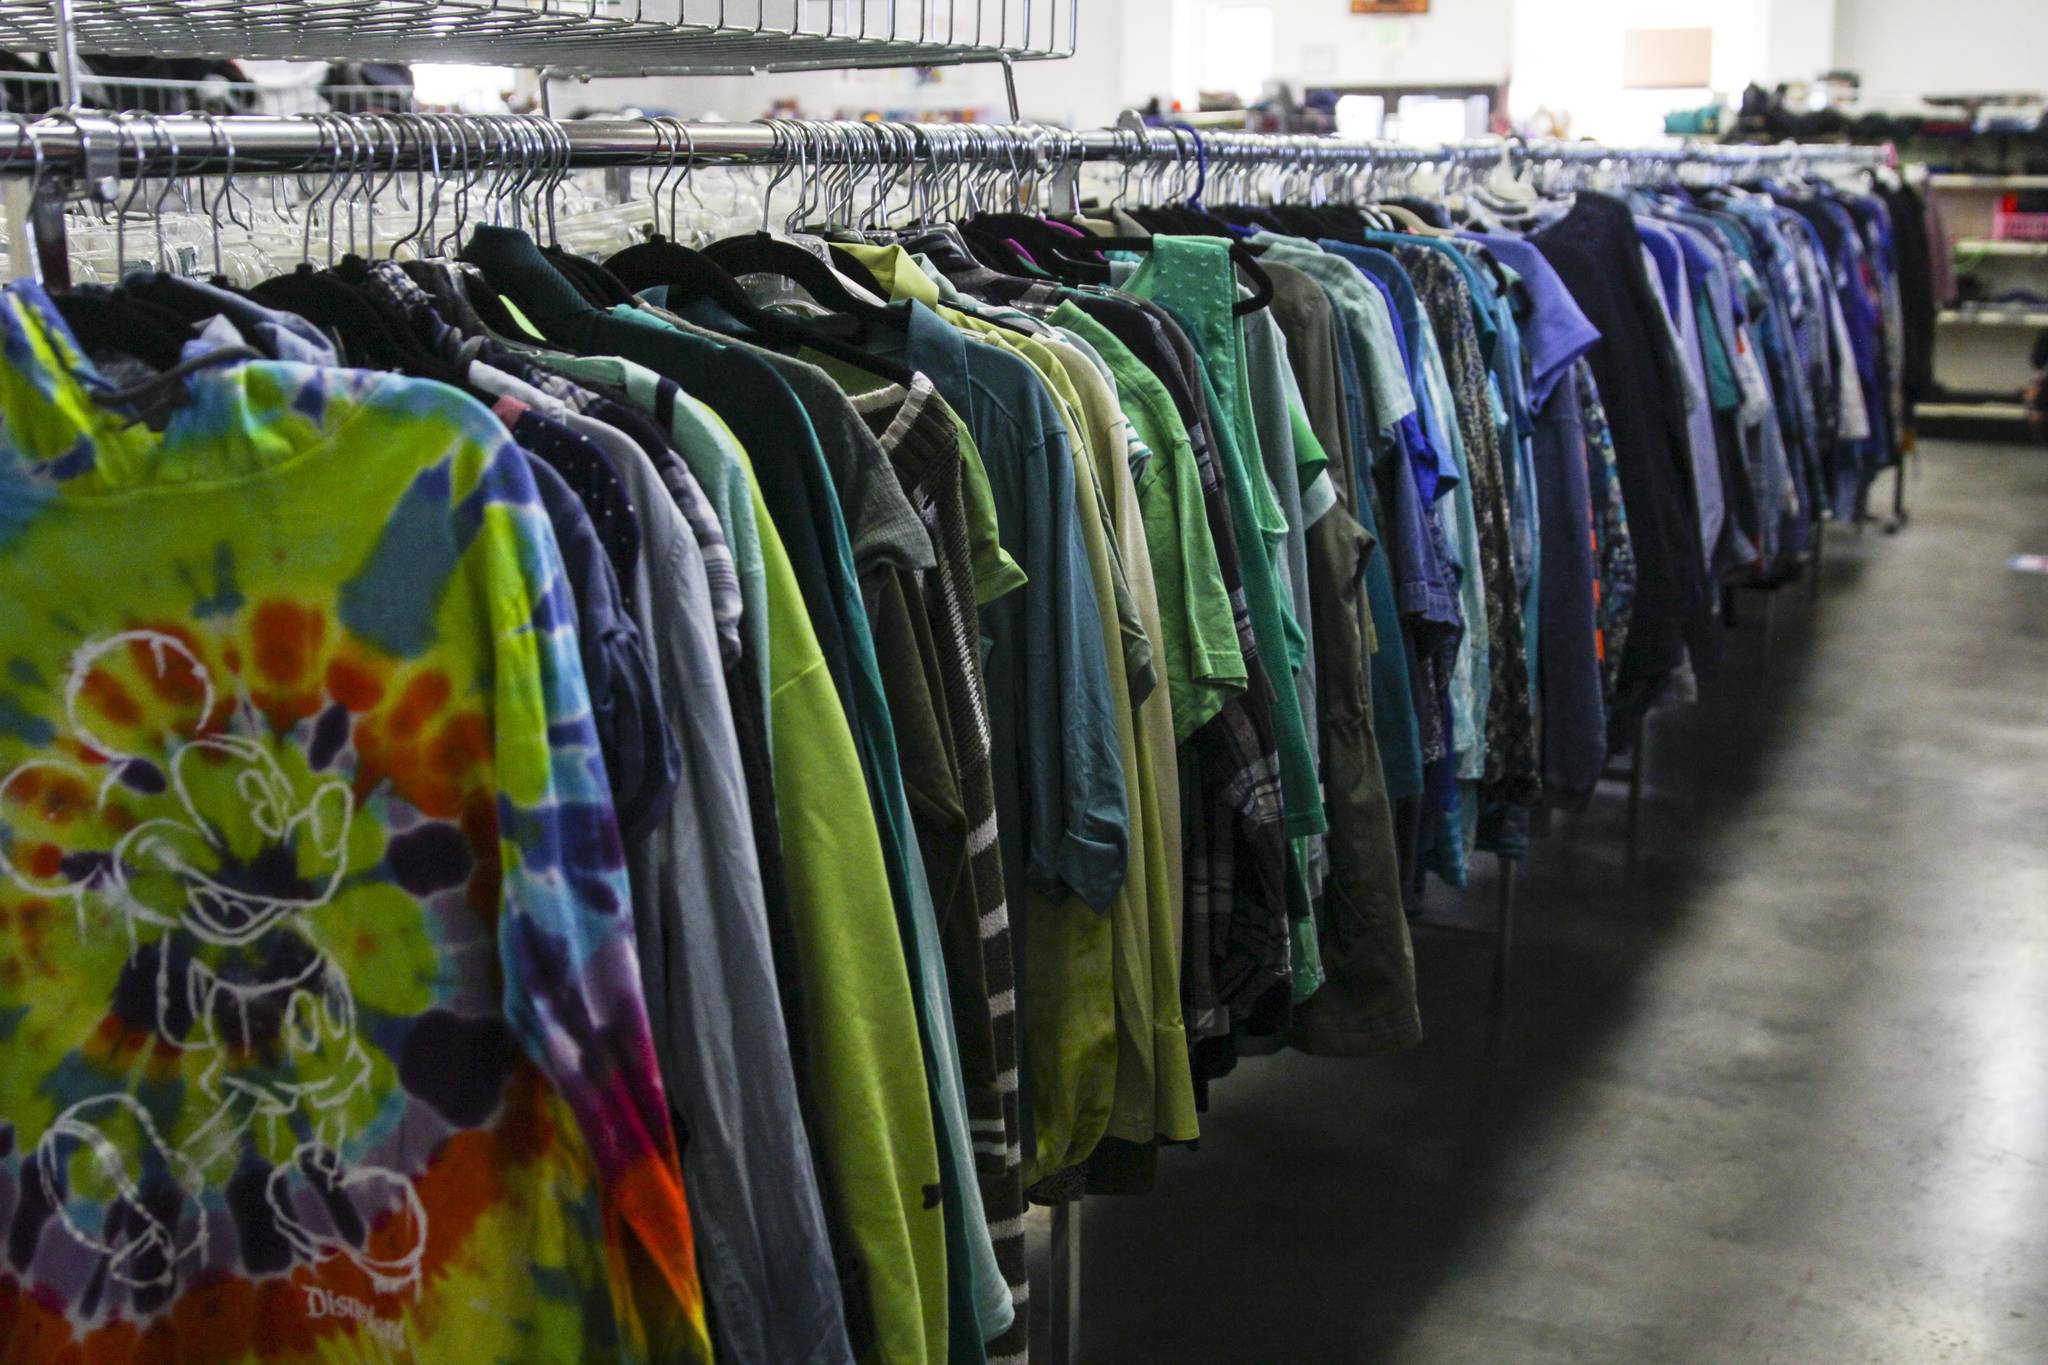 Juneau’s Salvation Army thrift store, inside shown here on Feb. 12, 2021, has been glanced but not stopped by the pandemic, a Salvation Army officer said. (Michael S. Lockett / Juneau Empire)